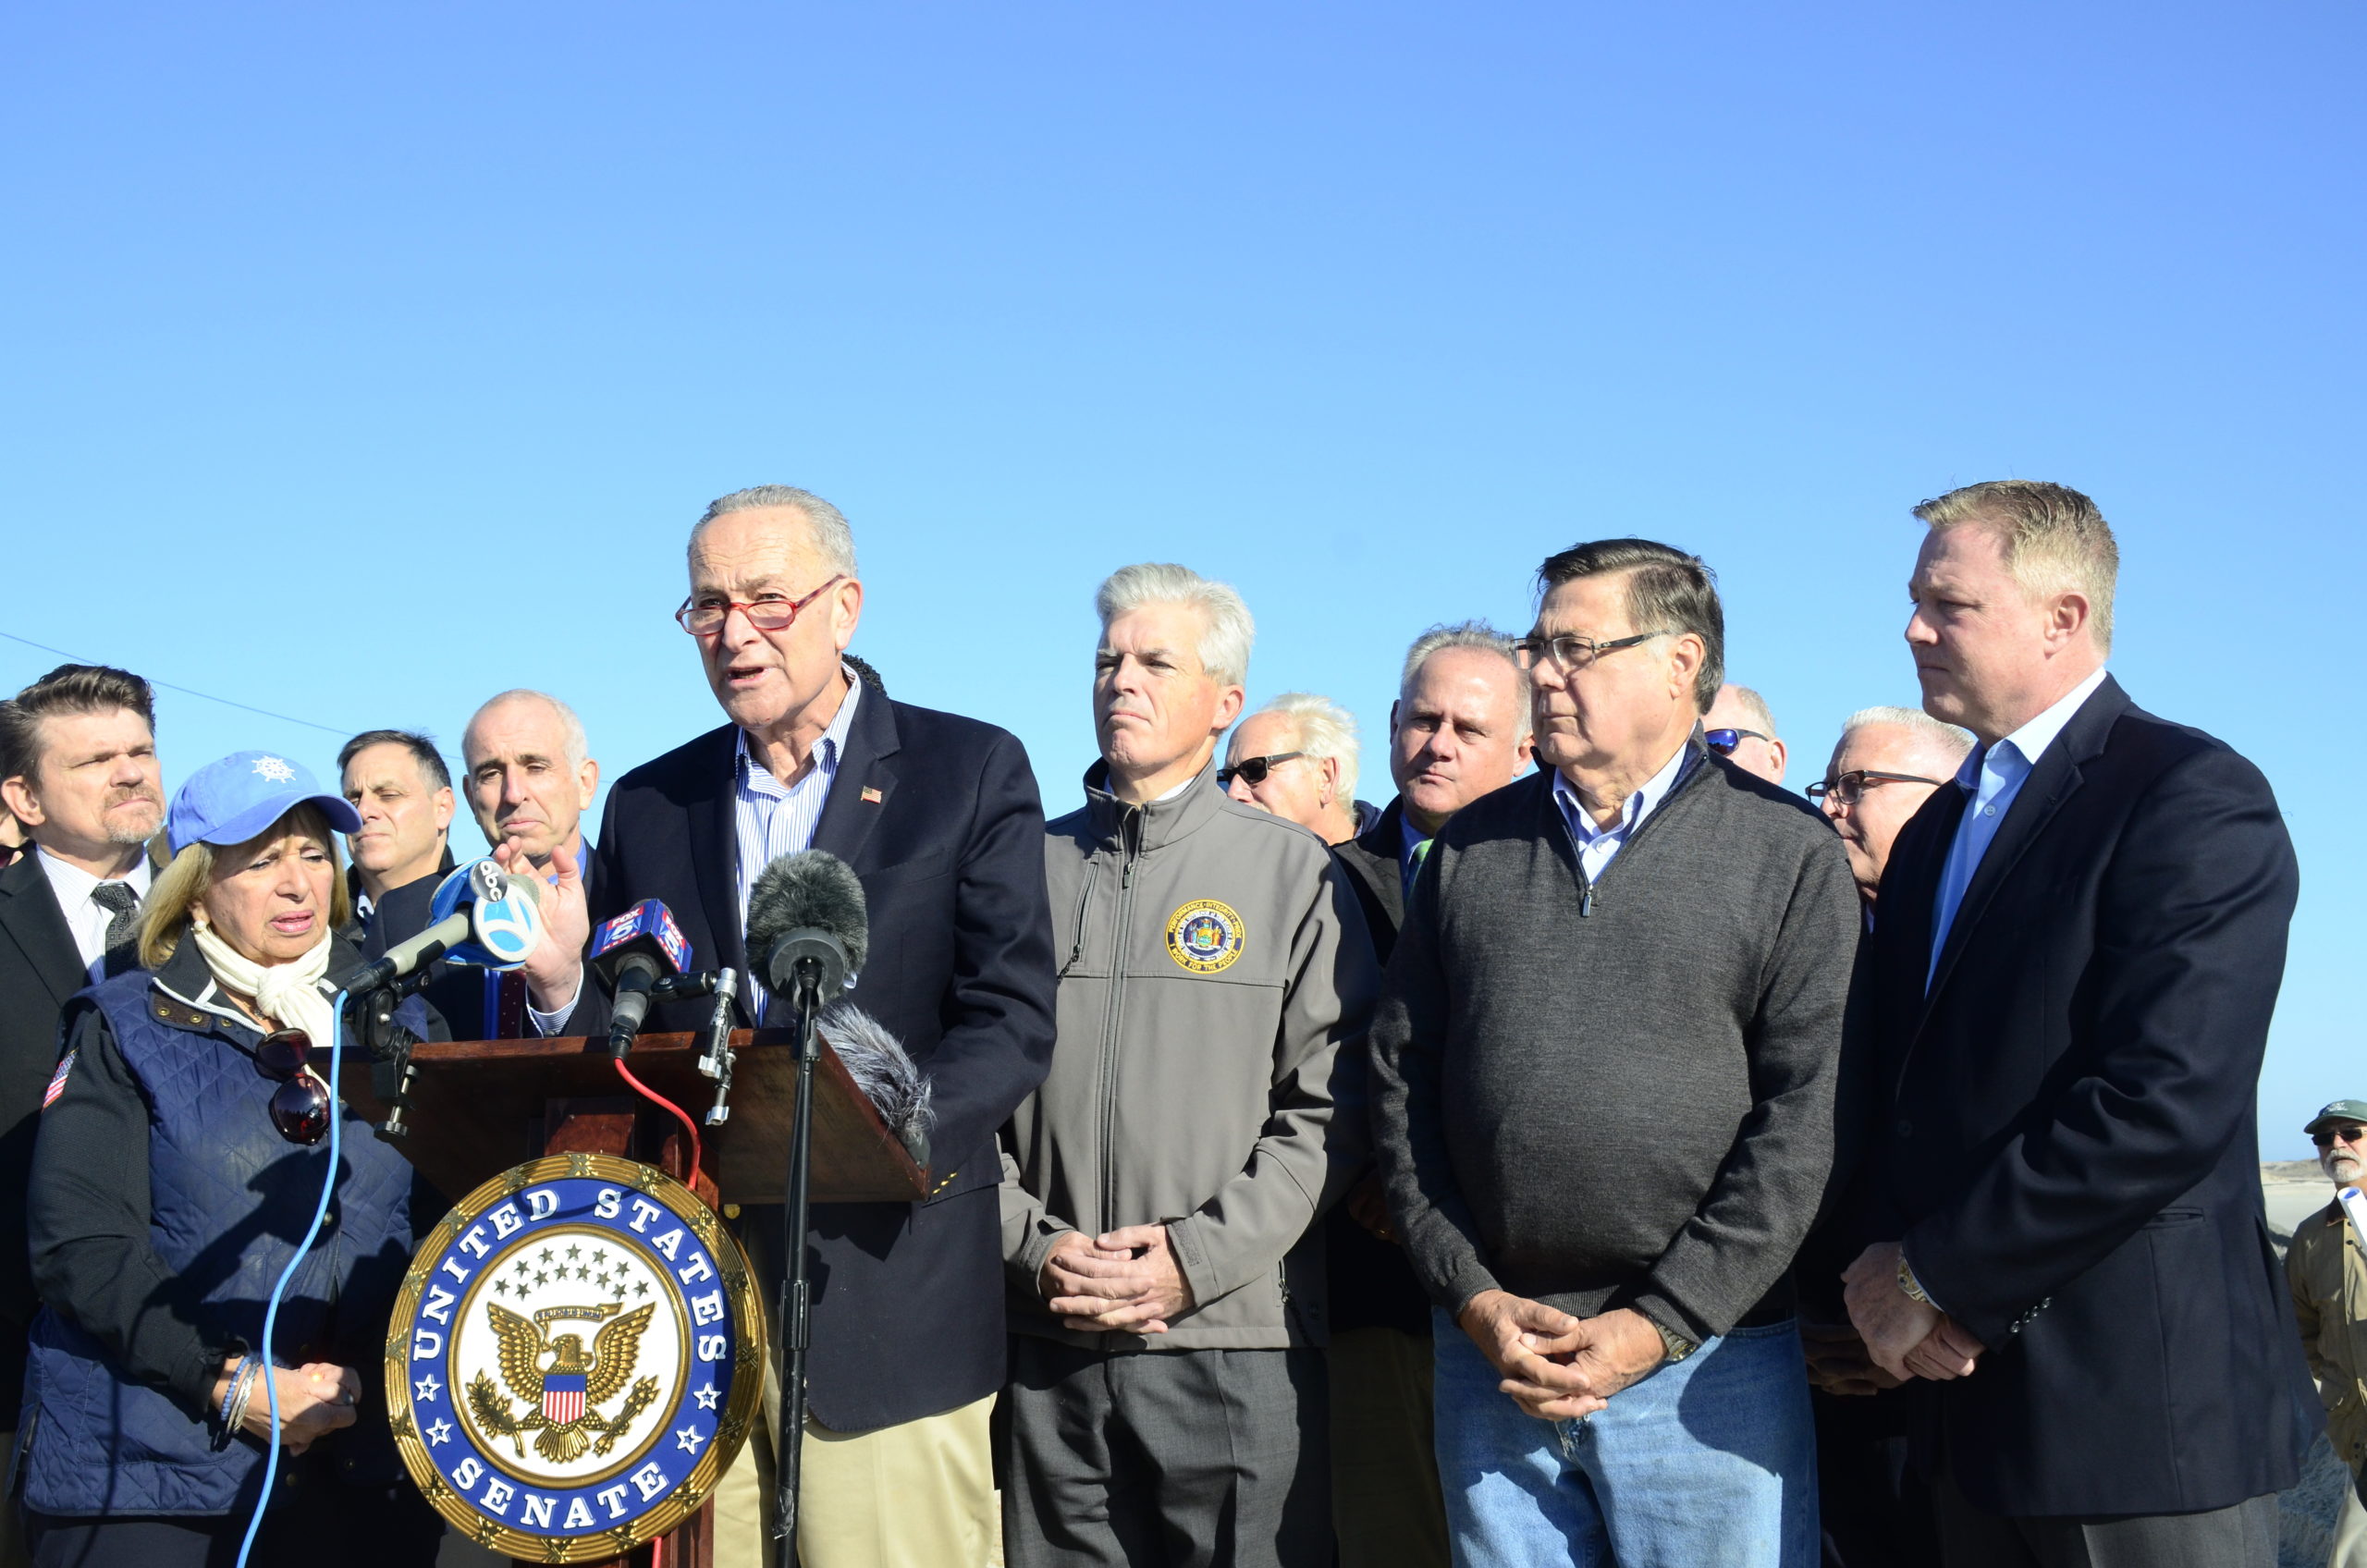 U.S. Senator Chuck Schumer joined local leaders in their efforts to get additional dredging in Hampton Bays. GREG WEHNER